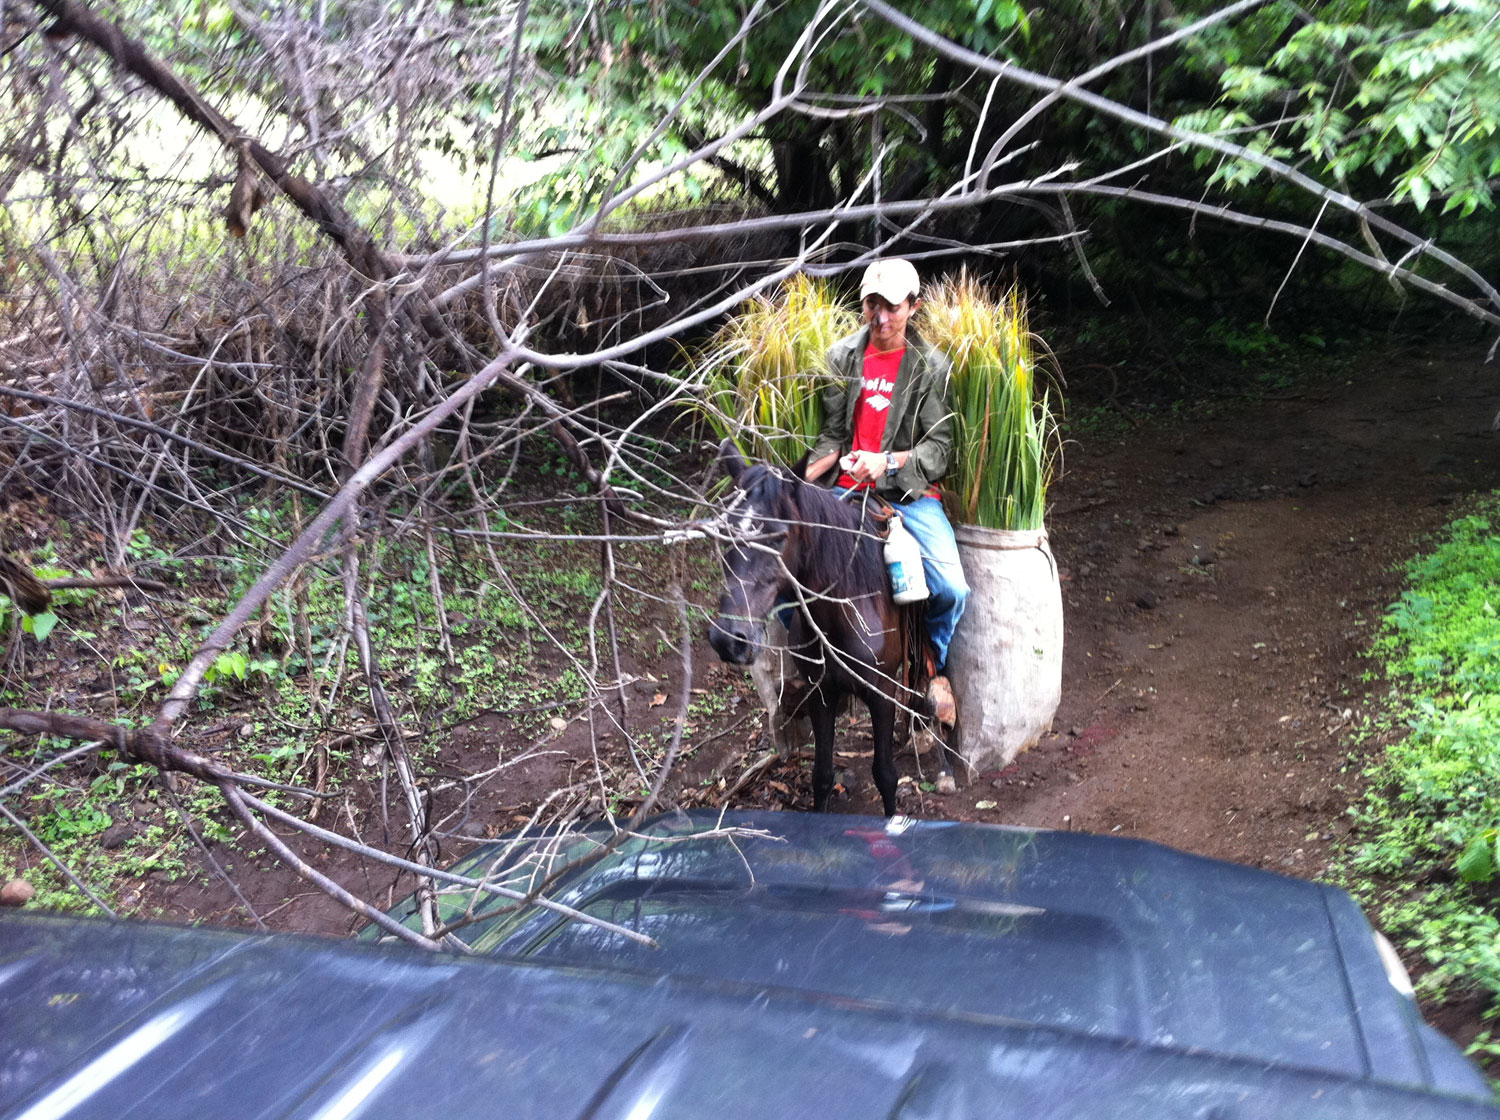 A caballero hauling sugar cane heads over to help us make it past this section by cutting down the branches with his machete.